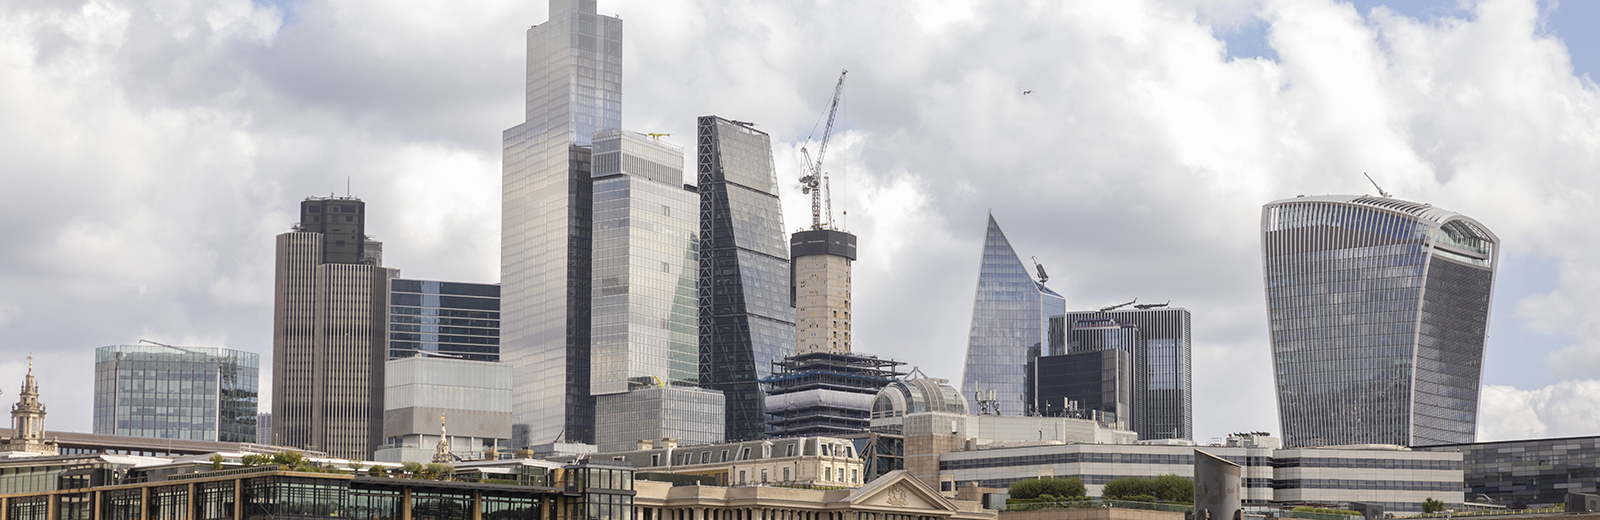 	London buildings overlooking the River Thames with a view of the skyline